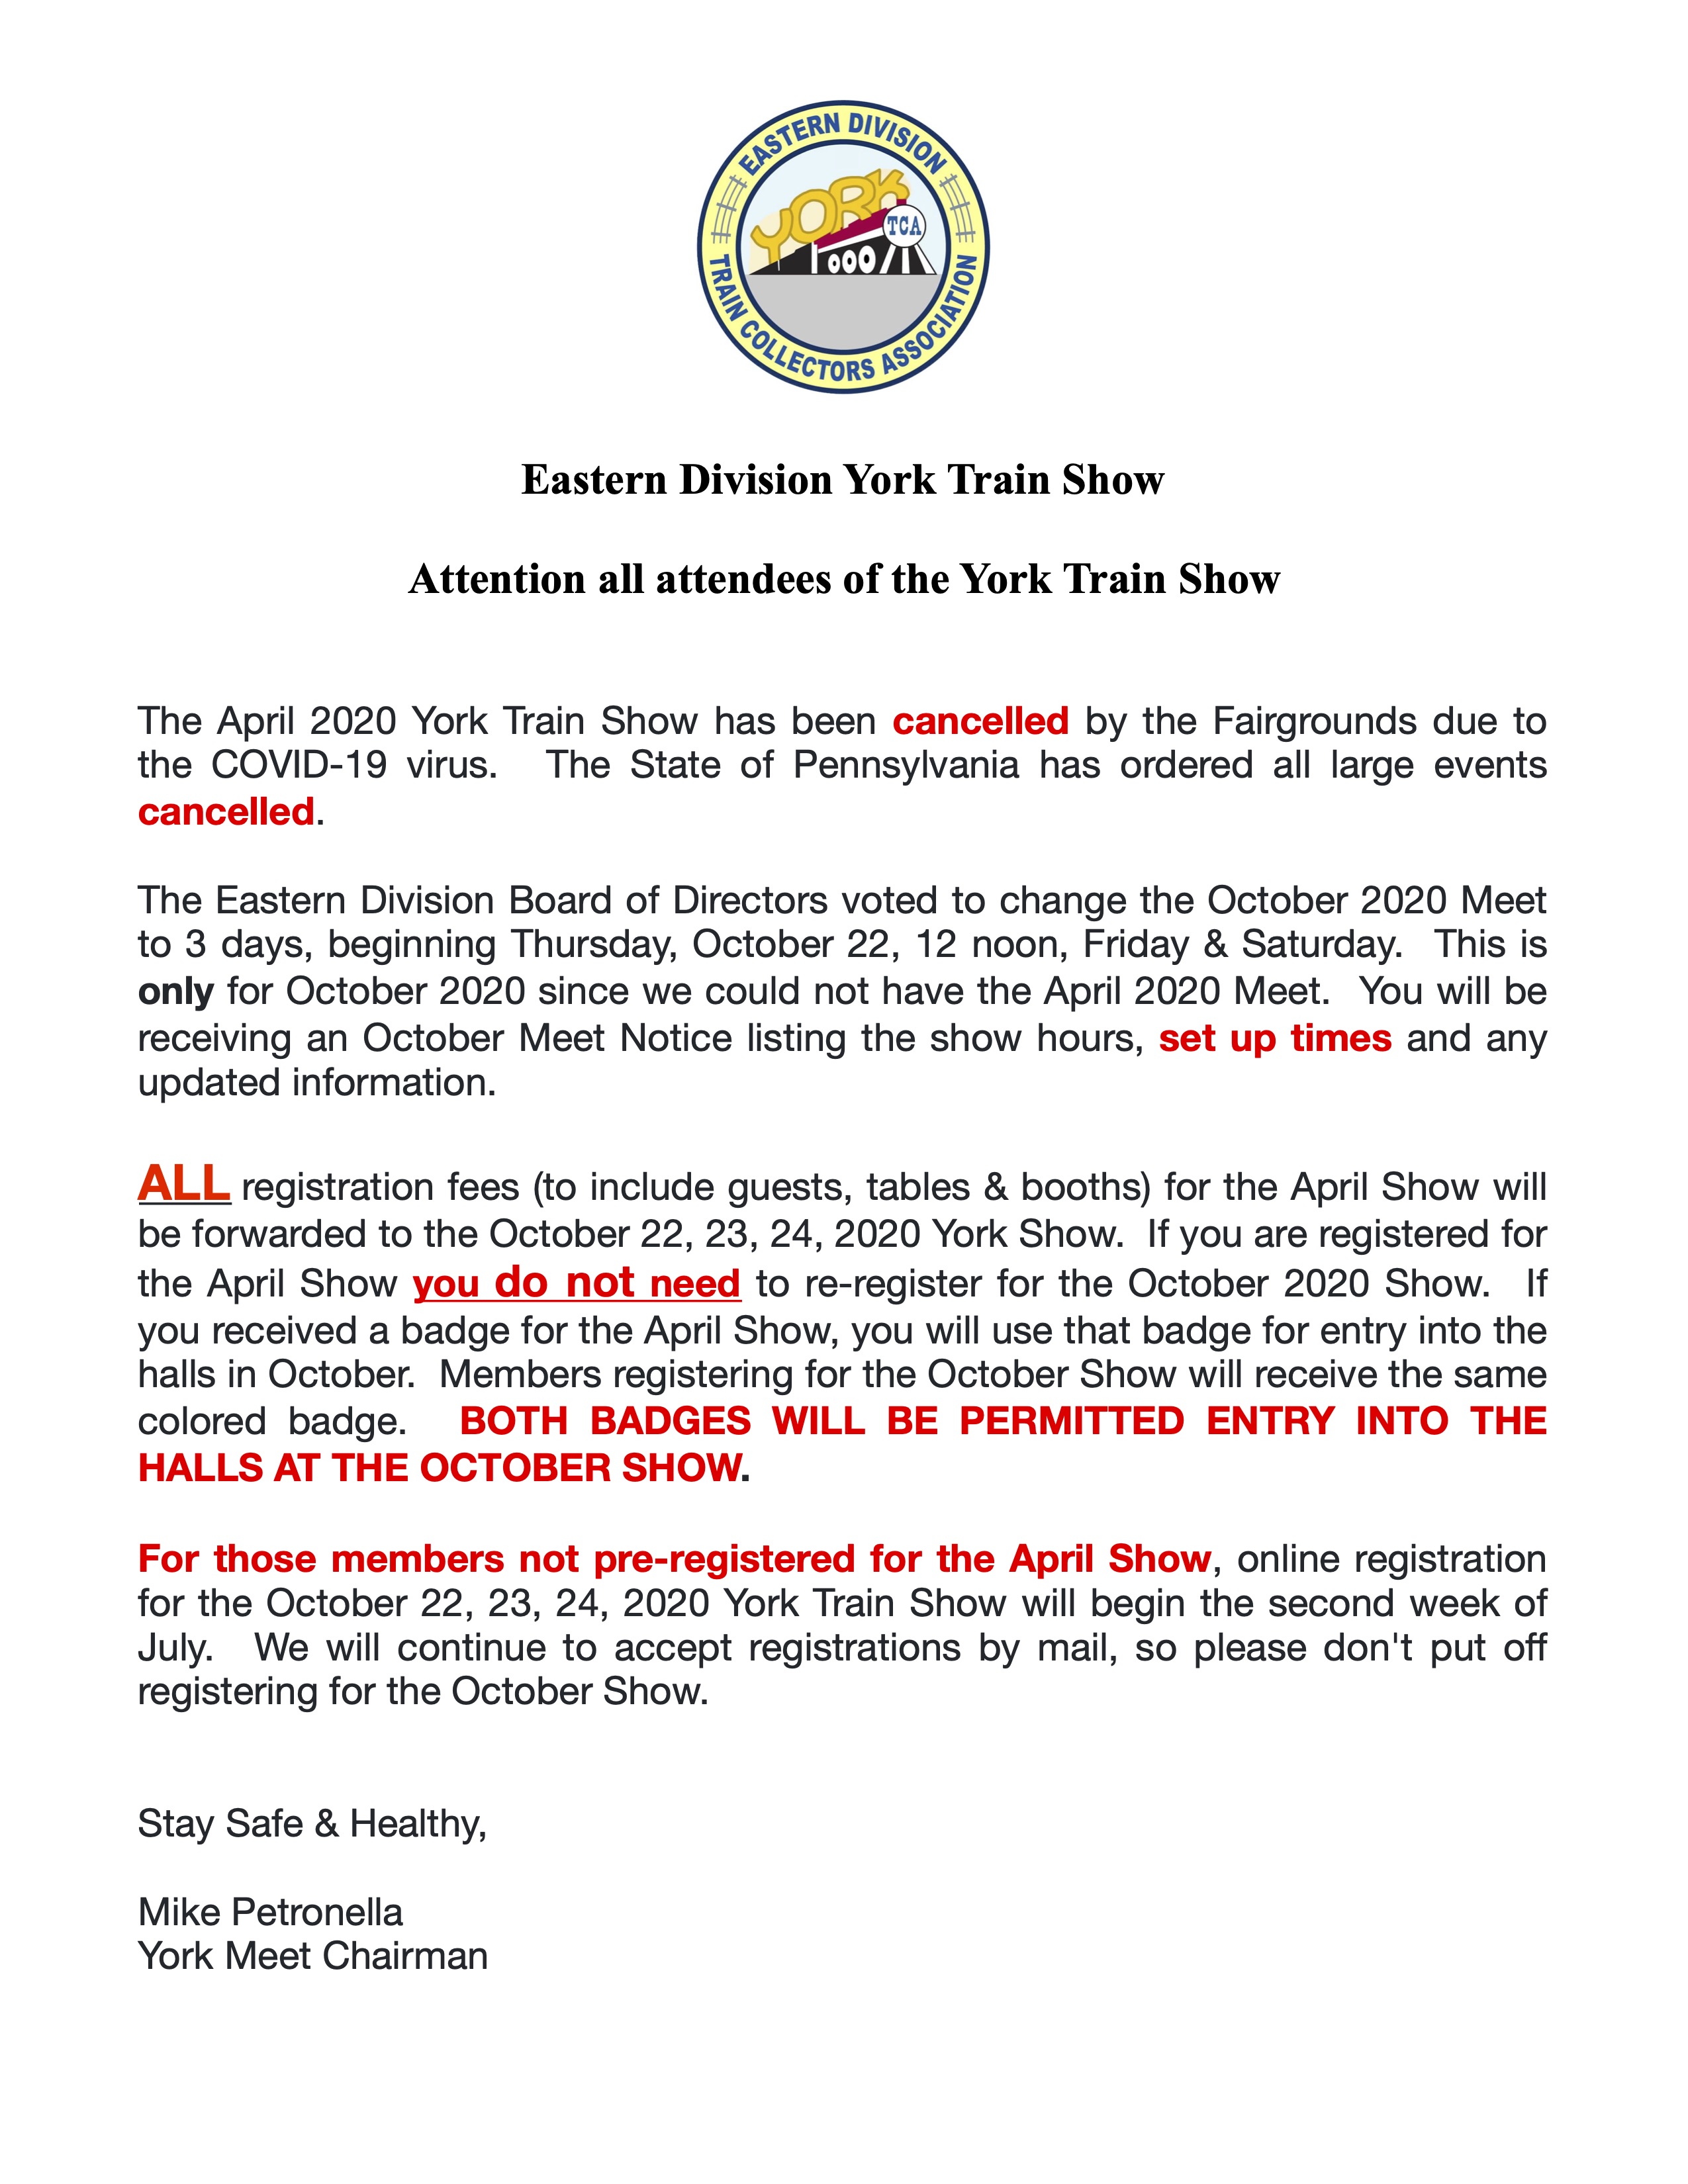 Eastern Division York Train Show Update